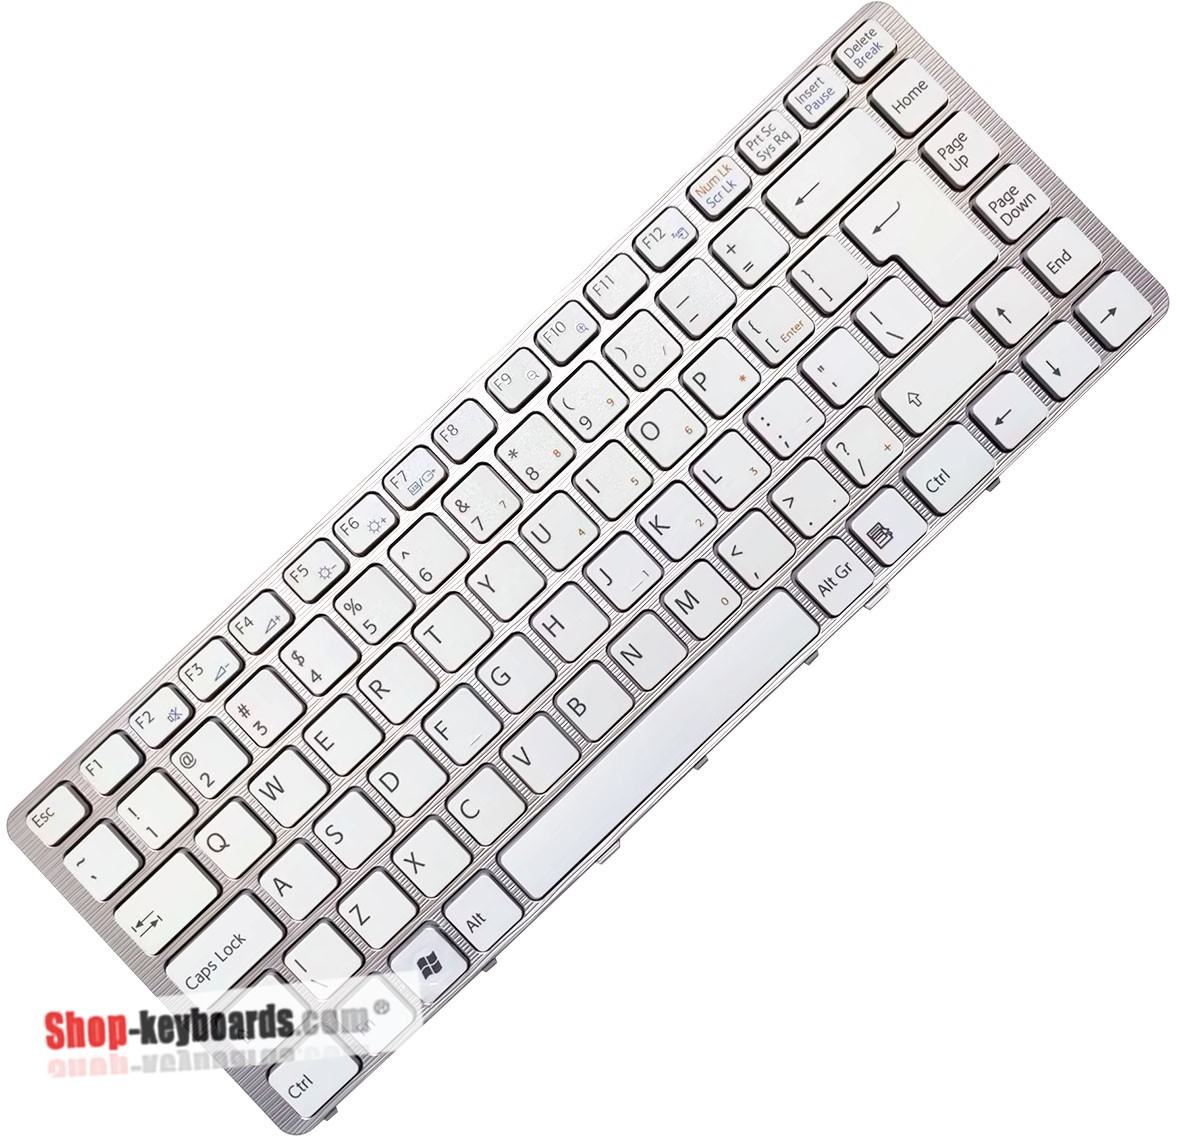 Sony VAIO VGN-NW26003B Keyboard replacement